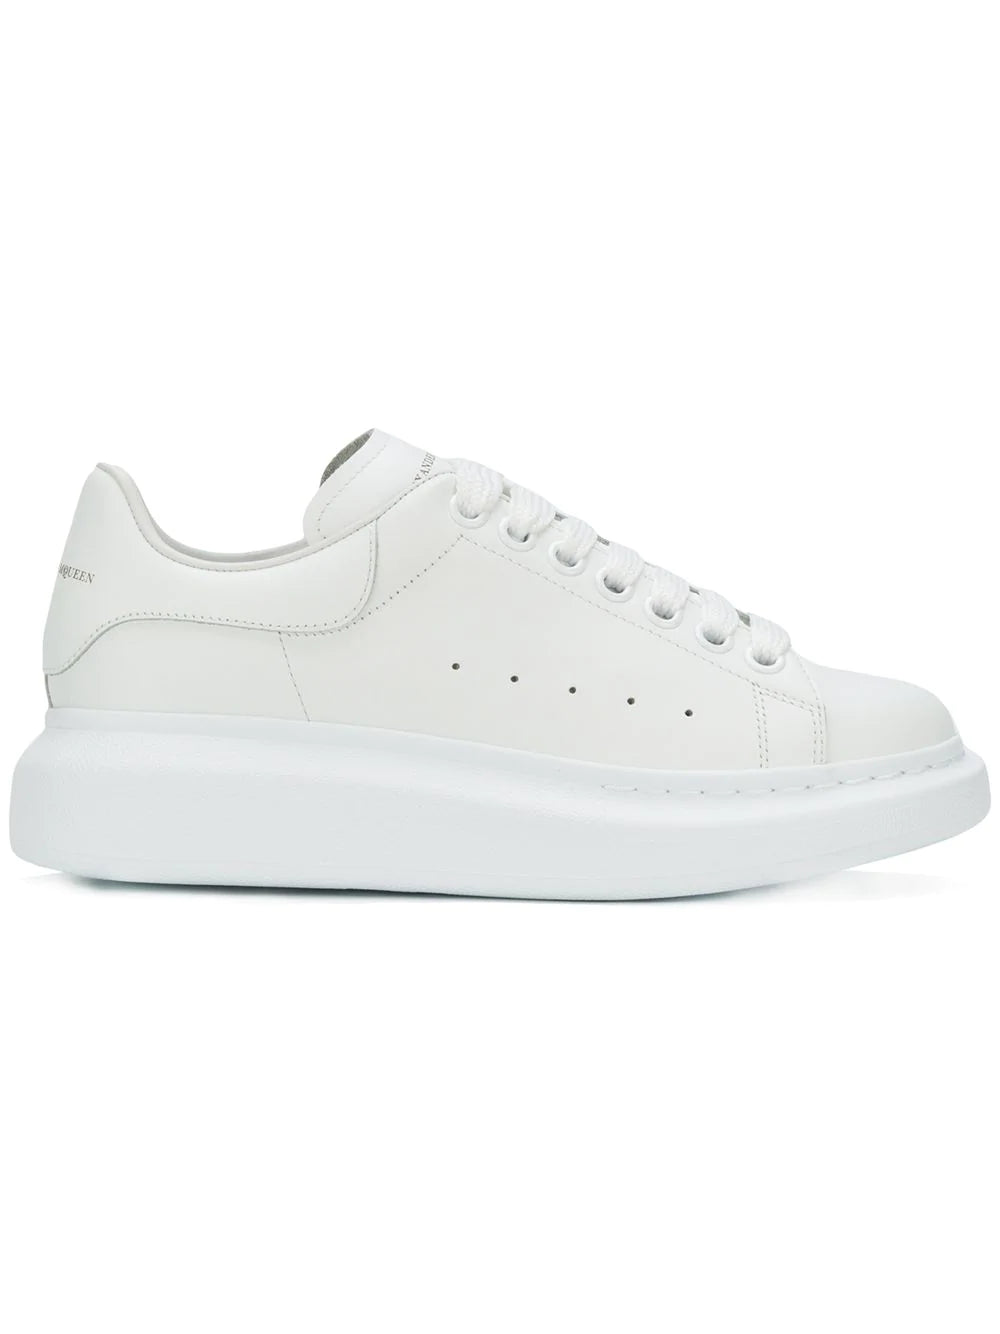 Alexander McQueen Cream leather and white sole